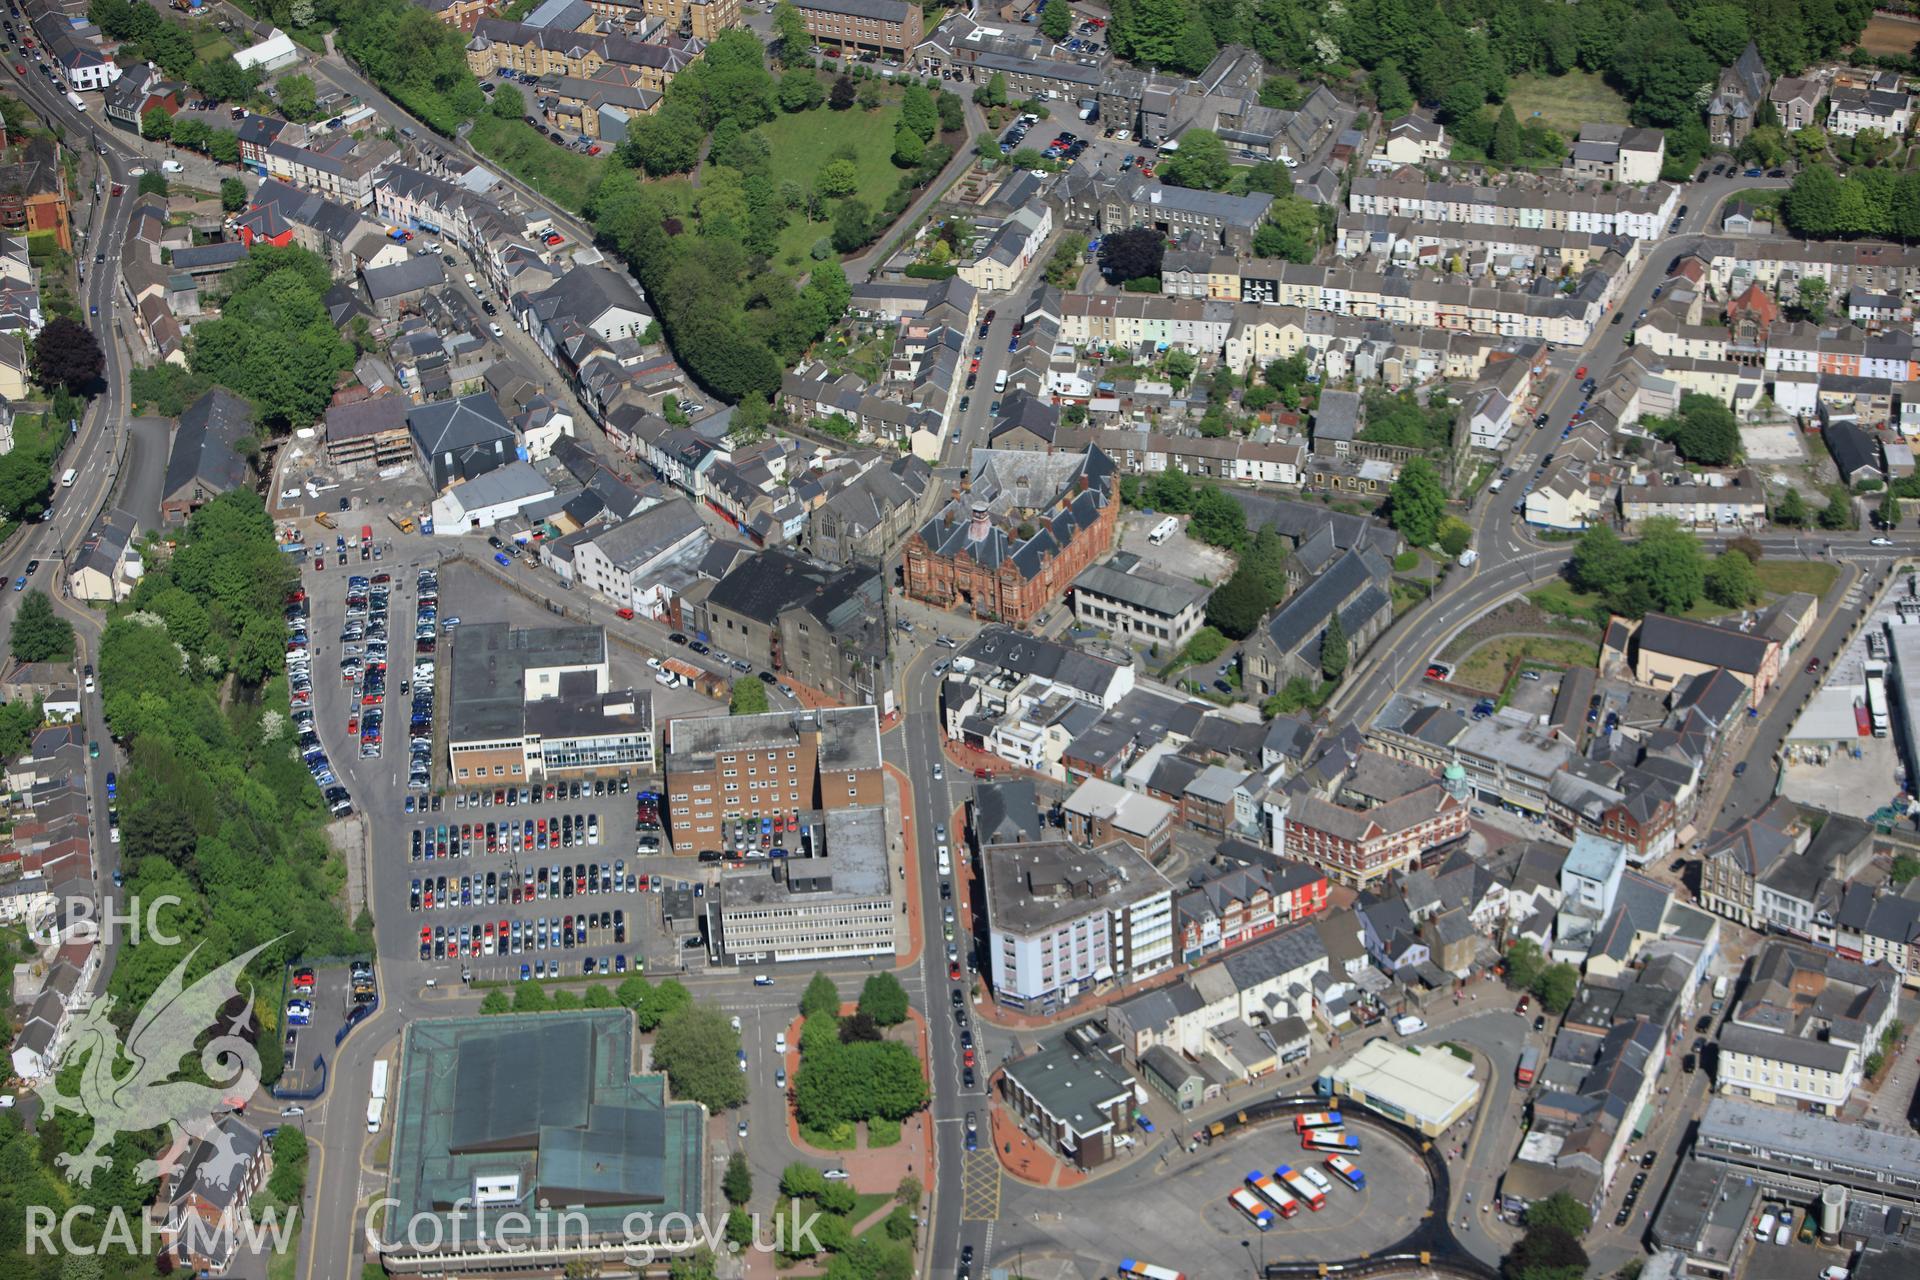 RCAHMW colour oblique photograph of Merthyr Tydfil. Taken by Toby Driver on 24/05/2010.